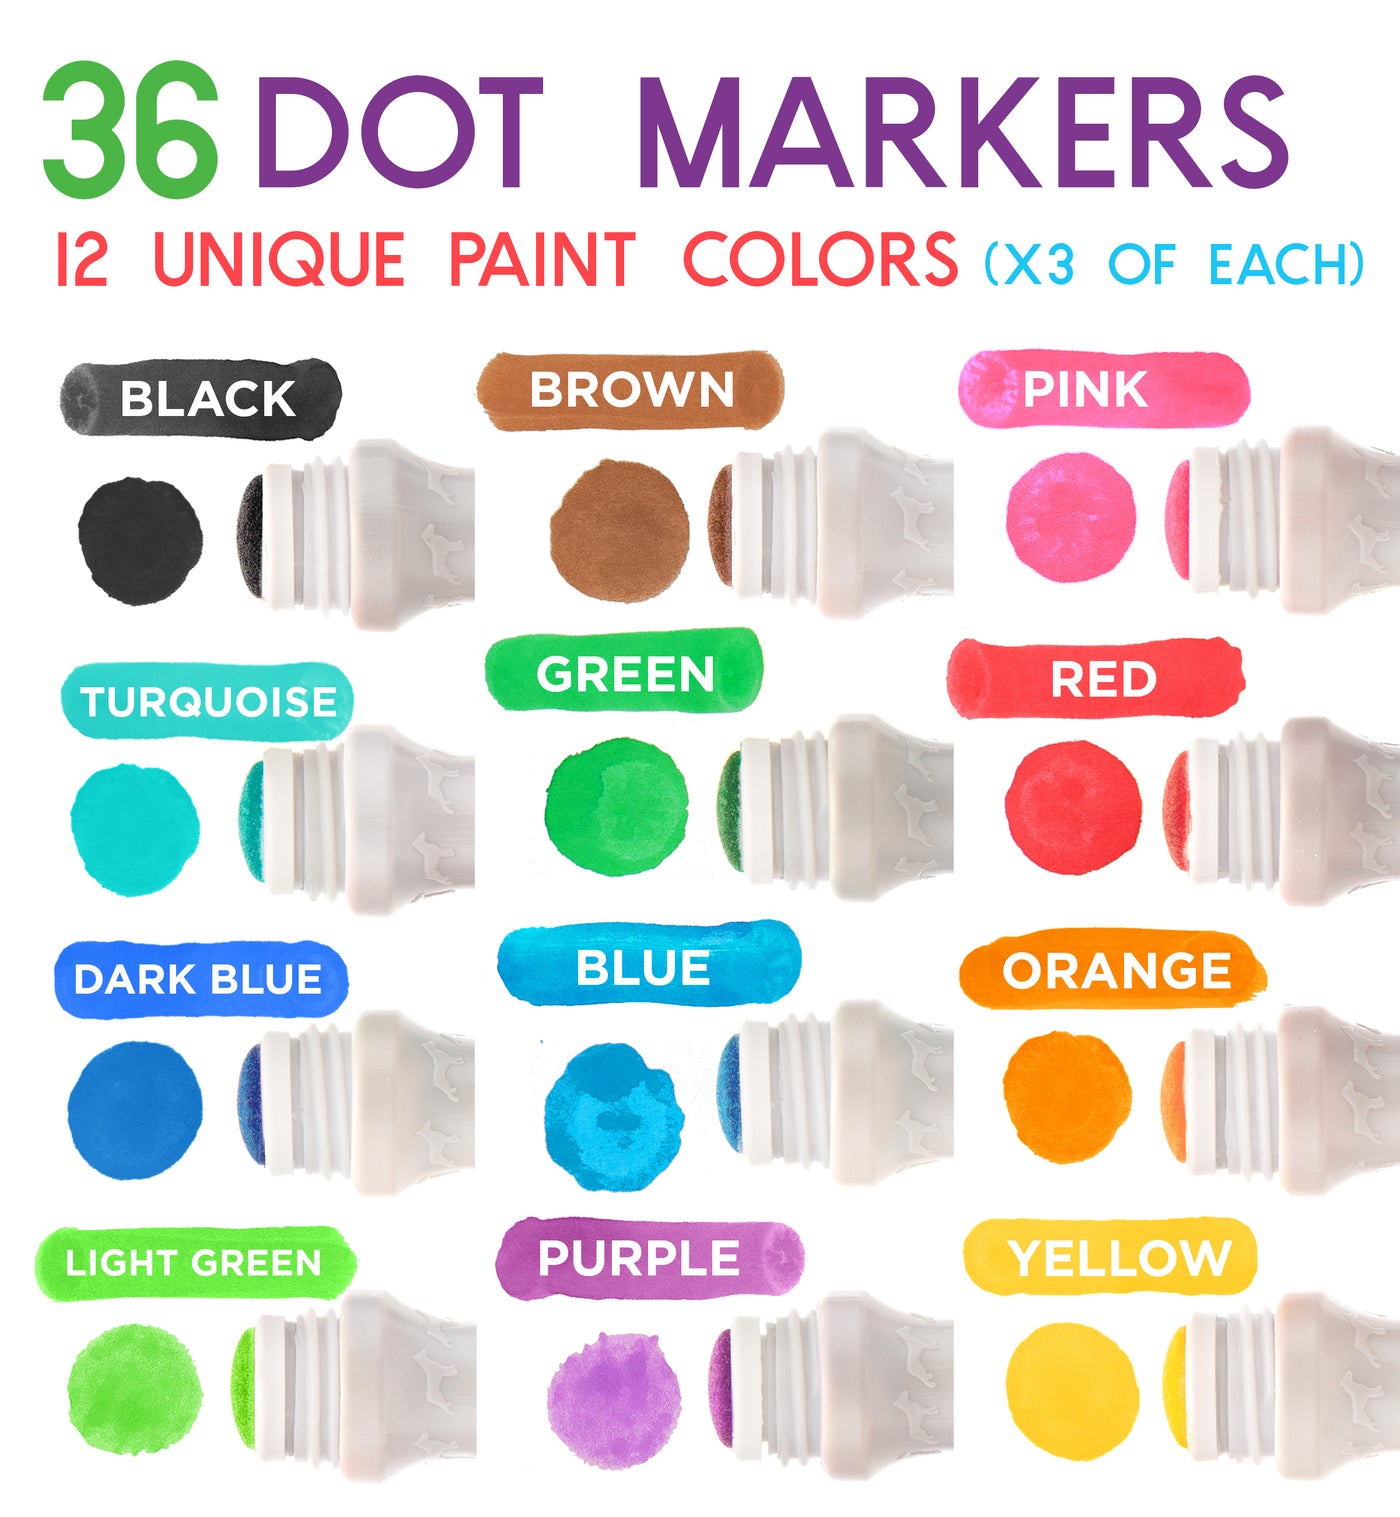 Cameron Frank - Washable Dot Markers 36-Pack w 121 Activity Sheets, Gift  Set for Toddler Art Activities 